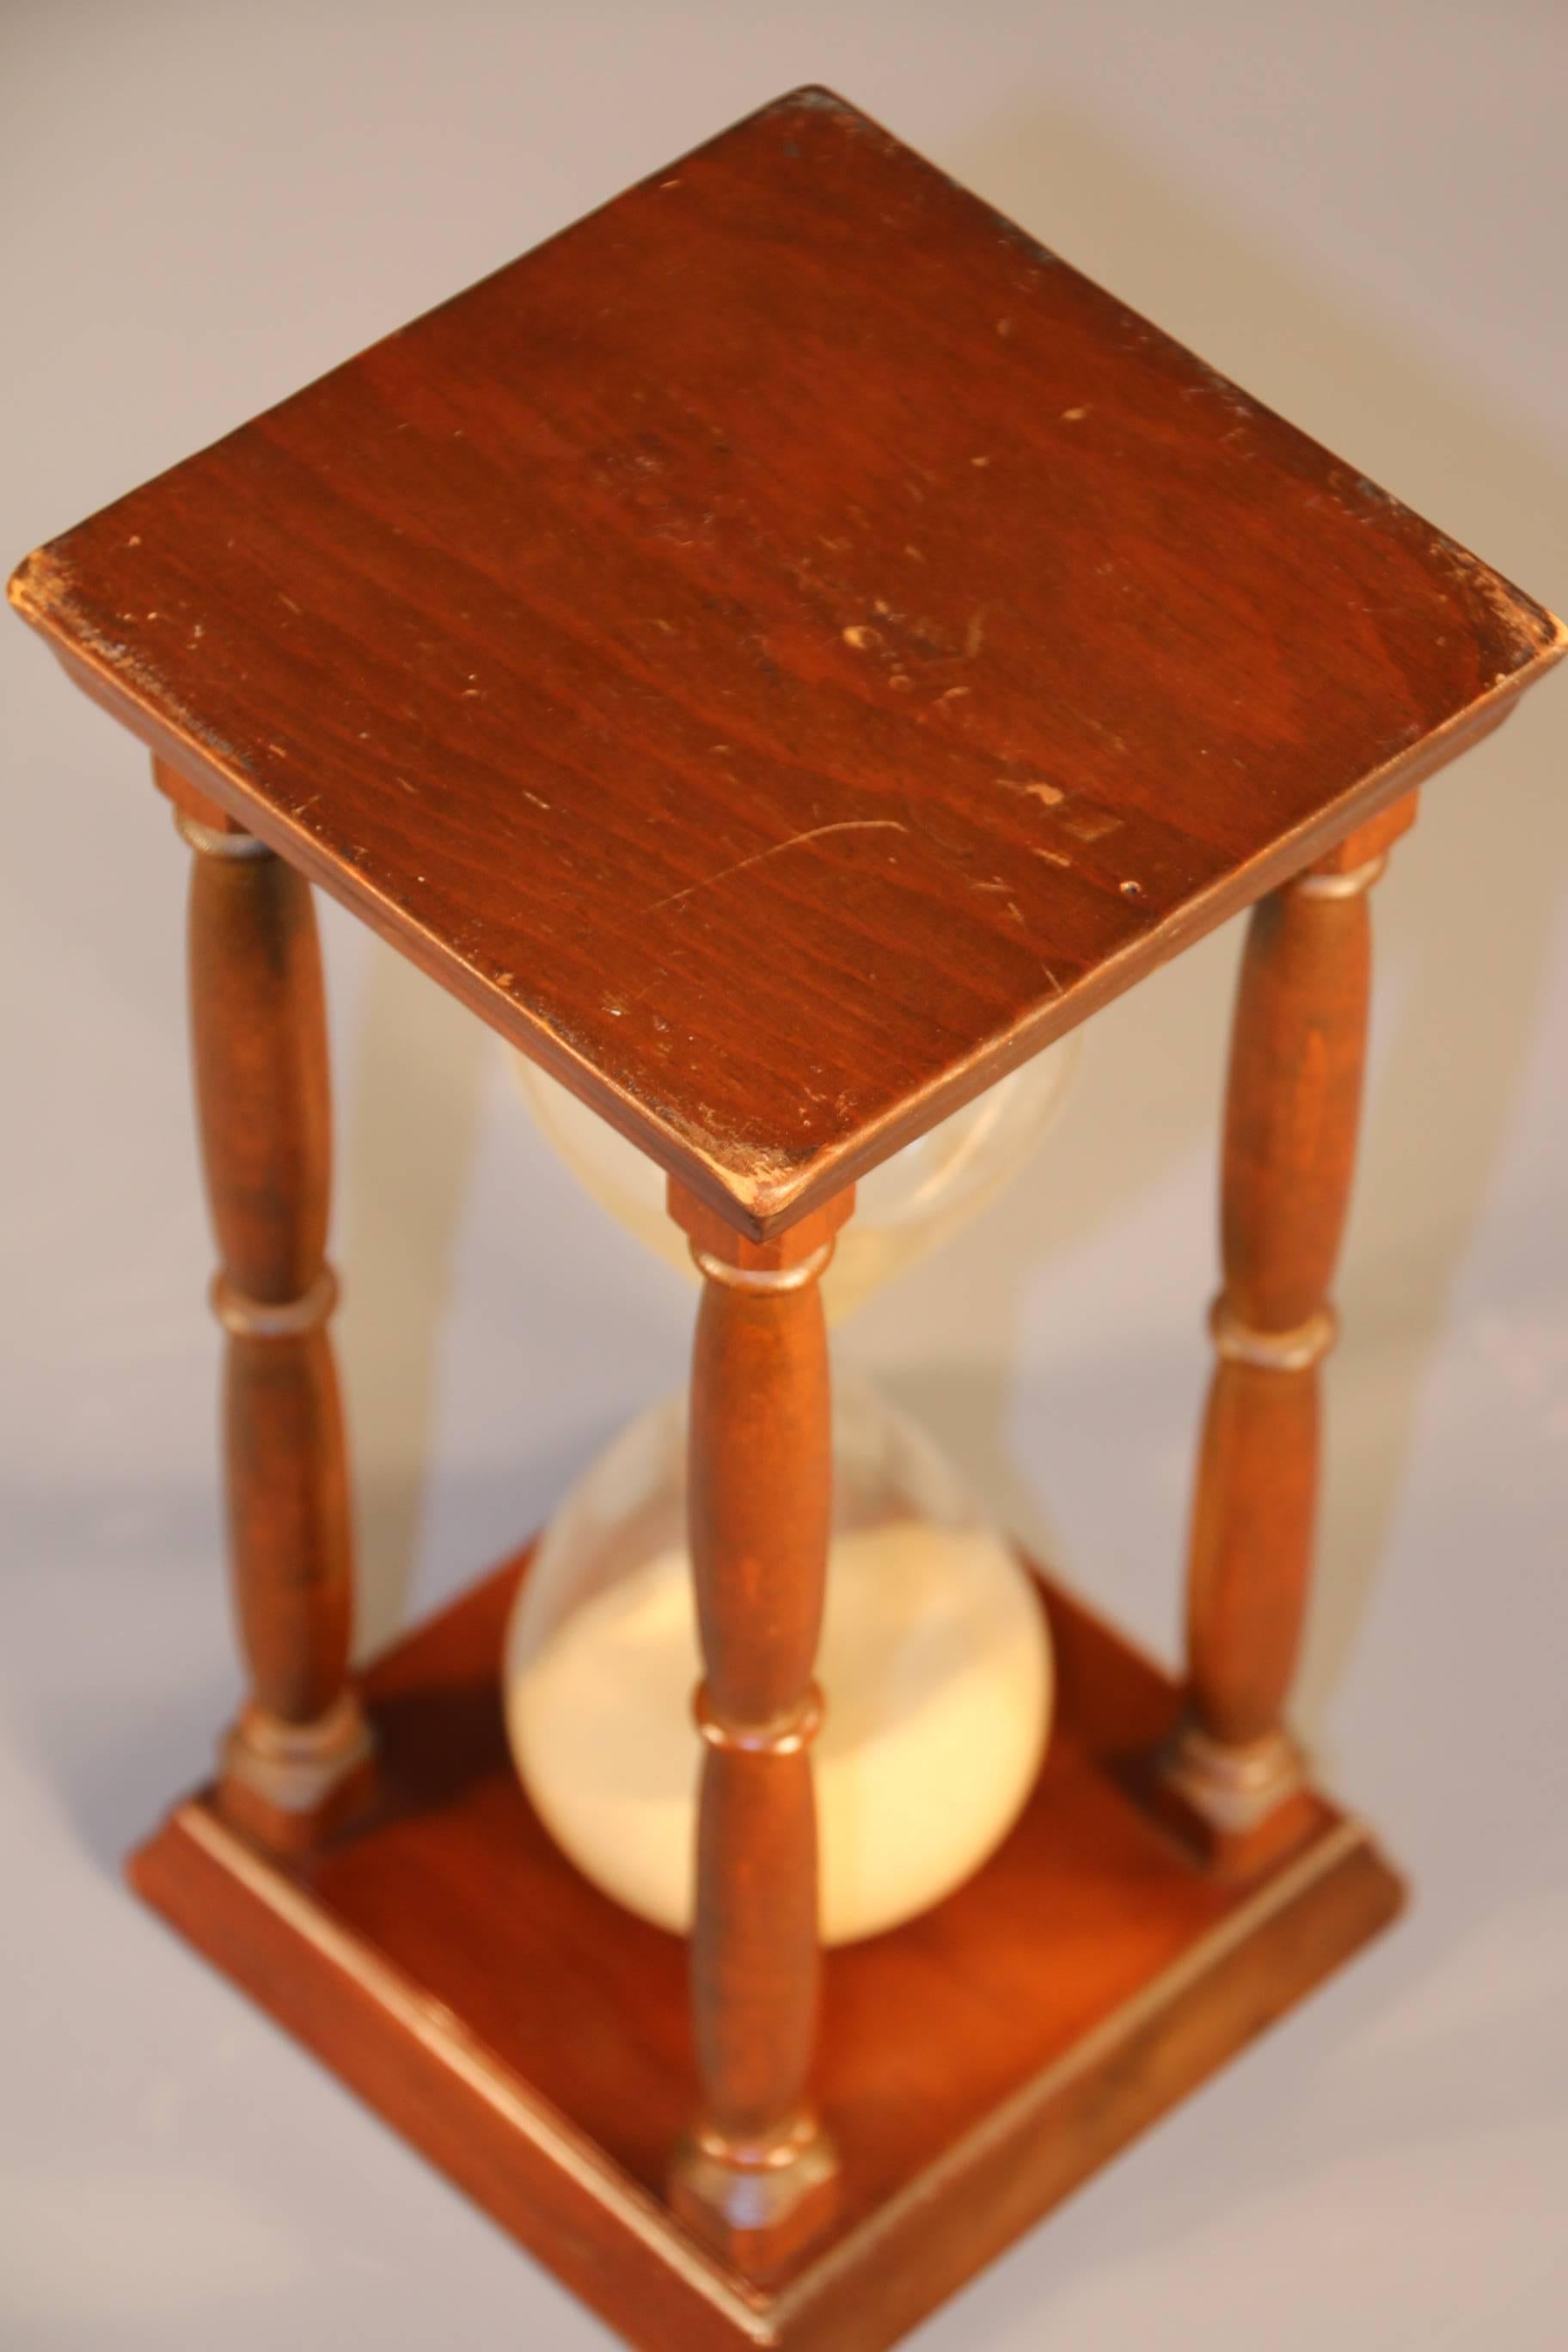 Late 19th Century Sand-Filled Hourglass For Sale 1